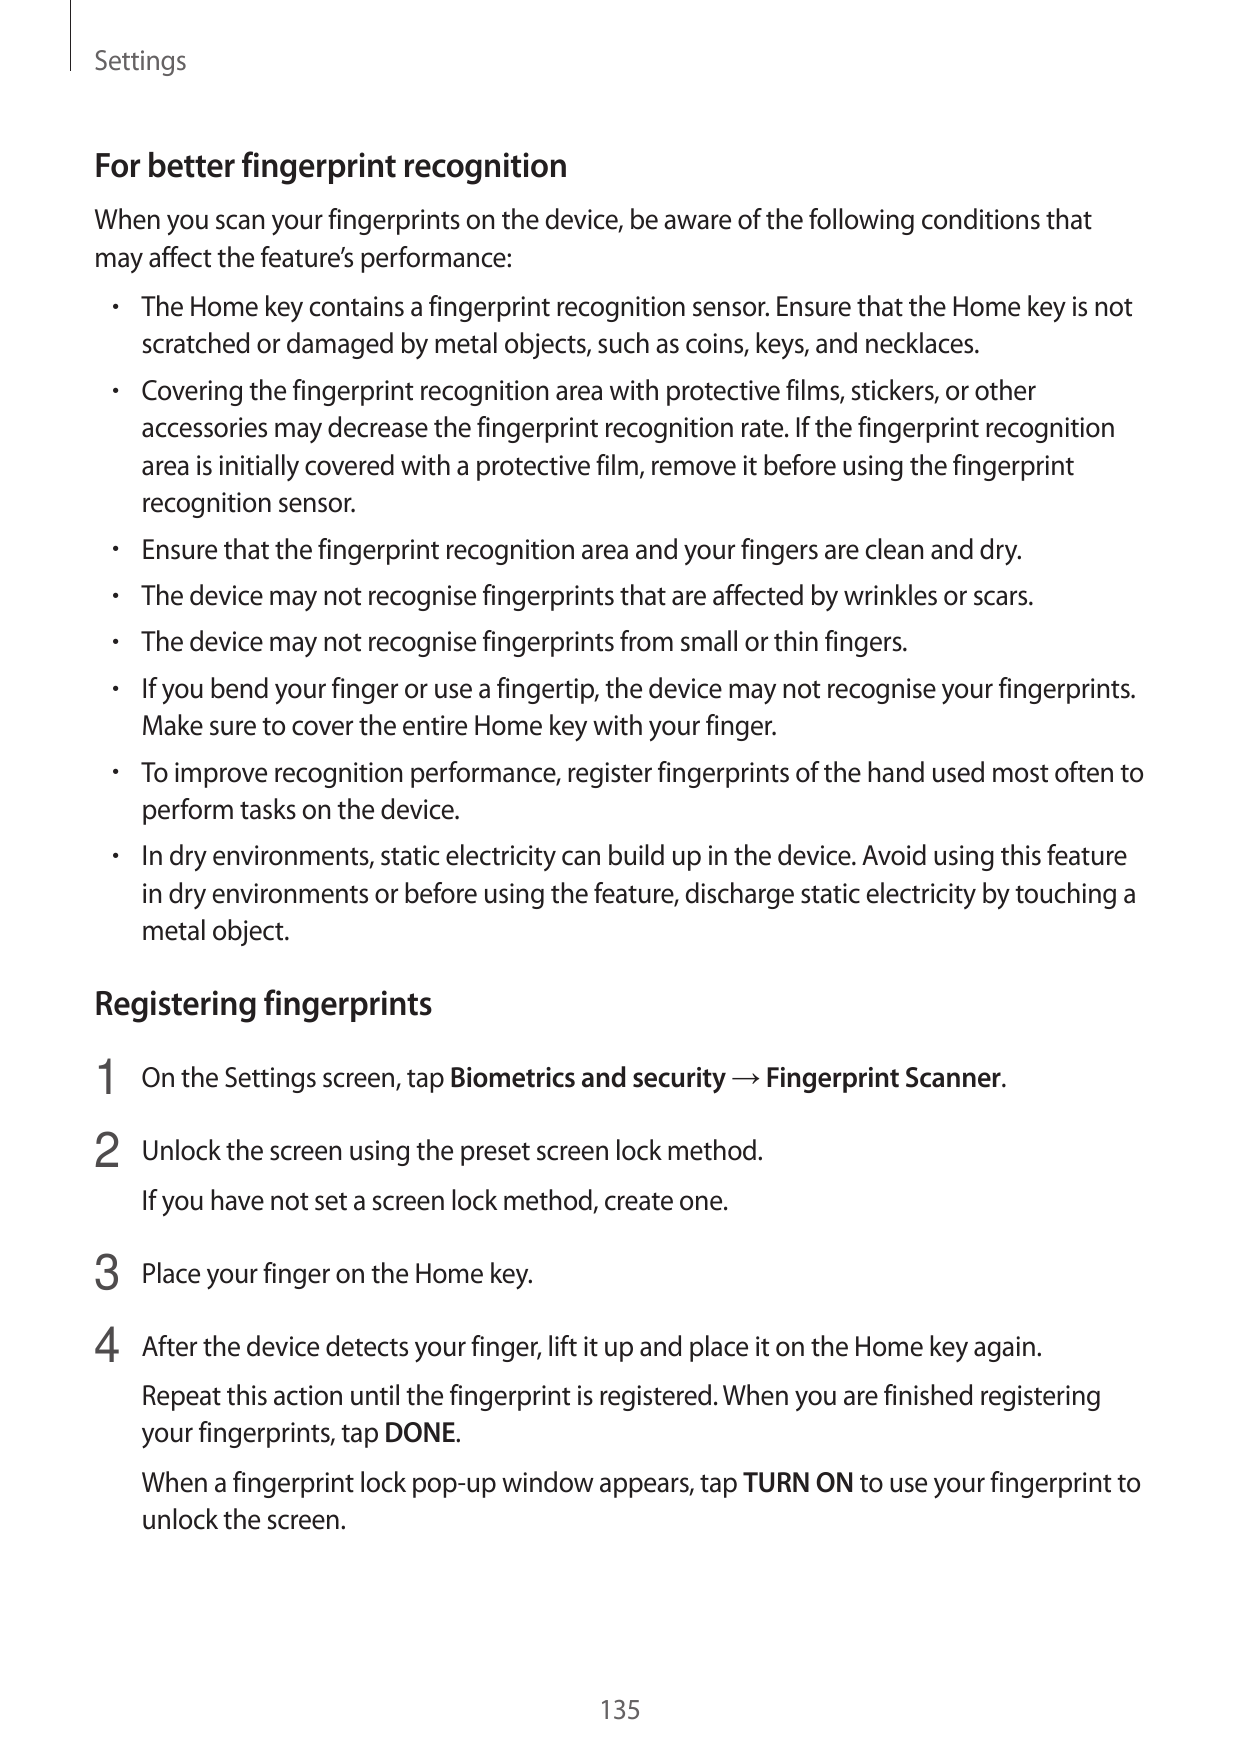 SettingsFor better fingerprint recognitionWhen you scan your fingerprints on the device, be aware of the following conditions th